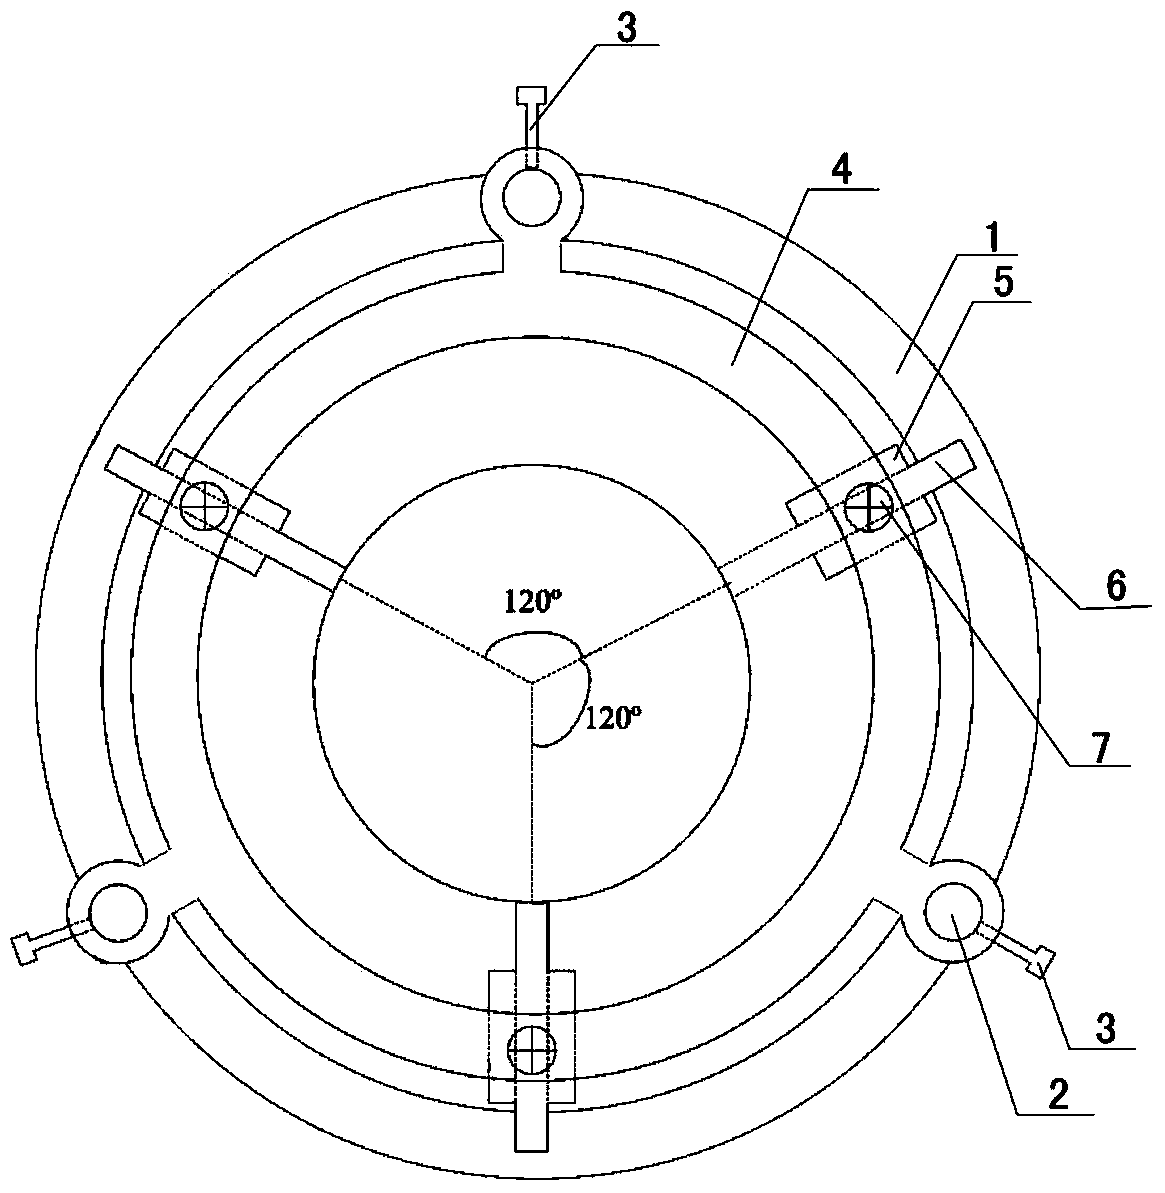 Device for measuring radial deformation of cylindrical test piece